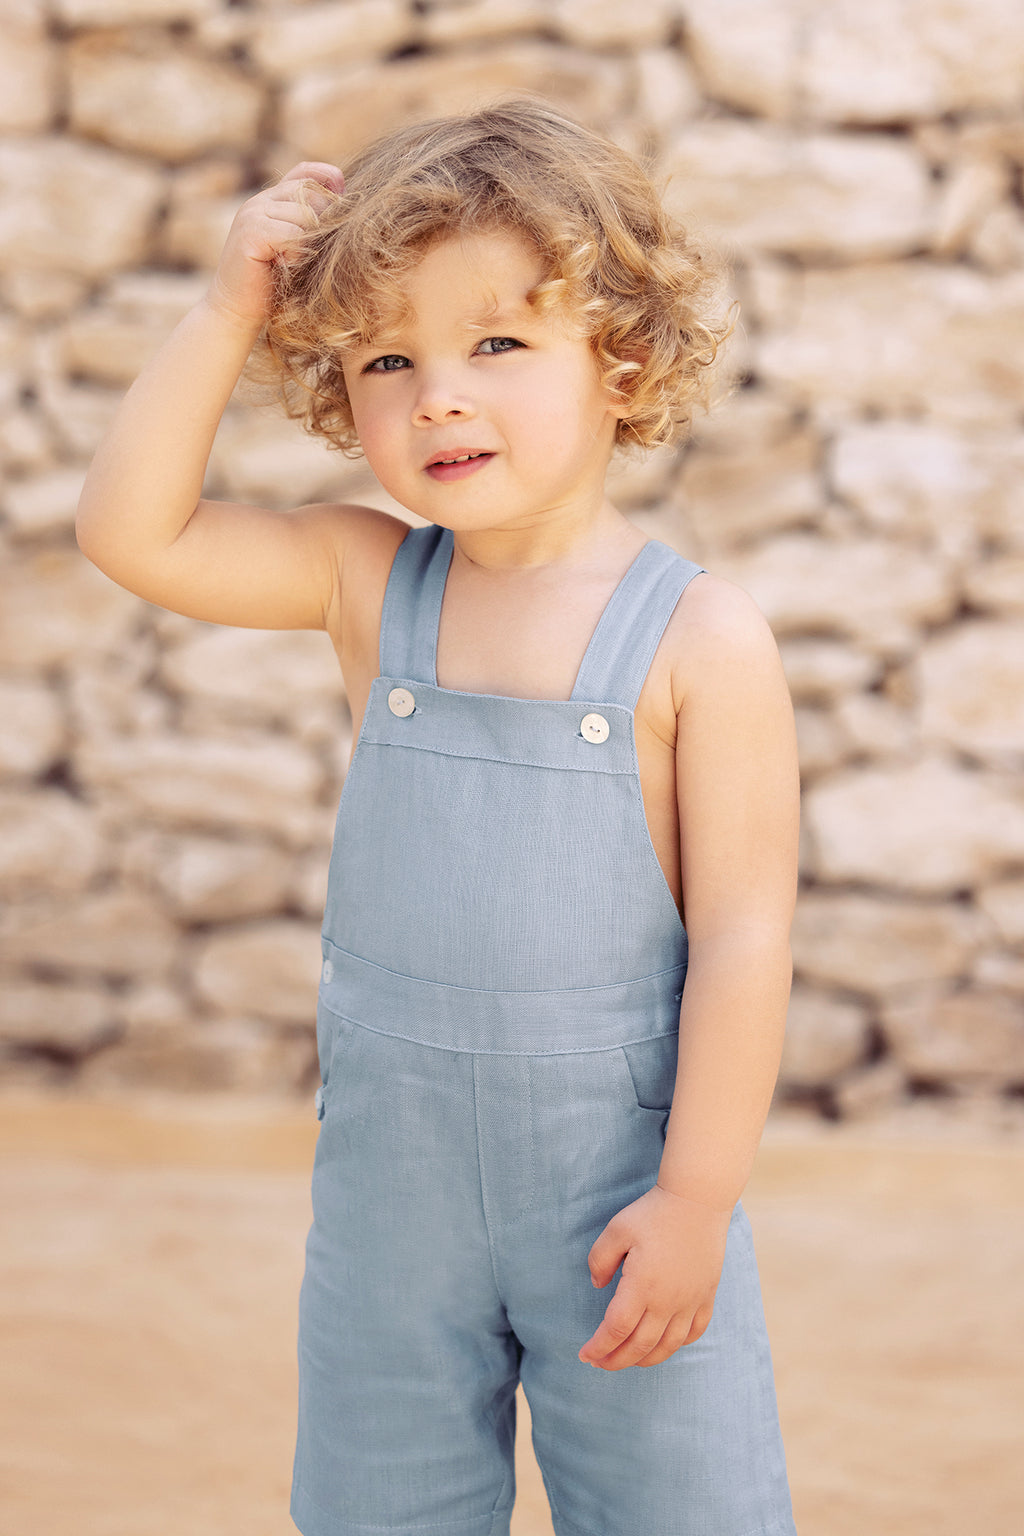 IENENS Toddler Infant Boy Long Pants Denim Overalls Dungarees Kids Baby Boys  Jeans Jumpsuit Clothes Clothing Outfits Trousers